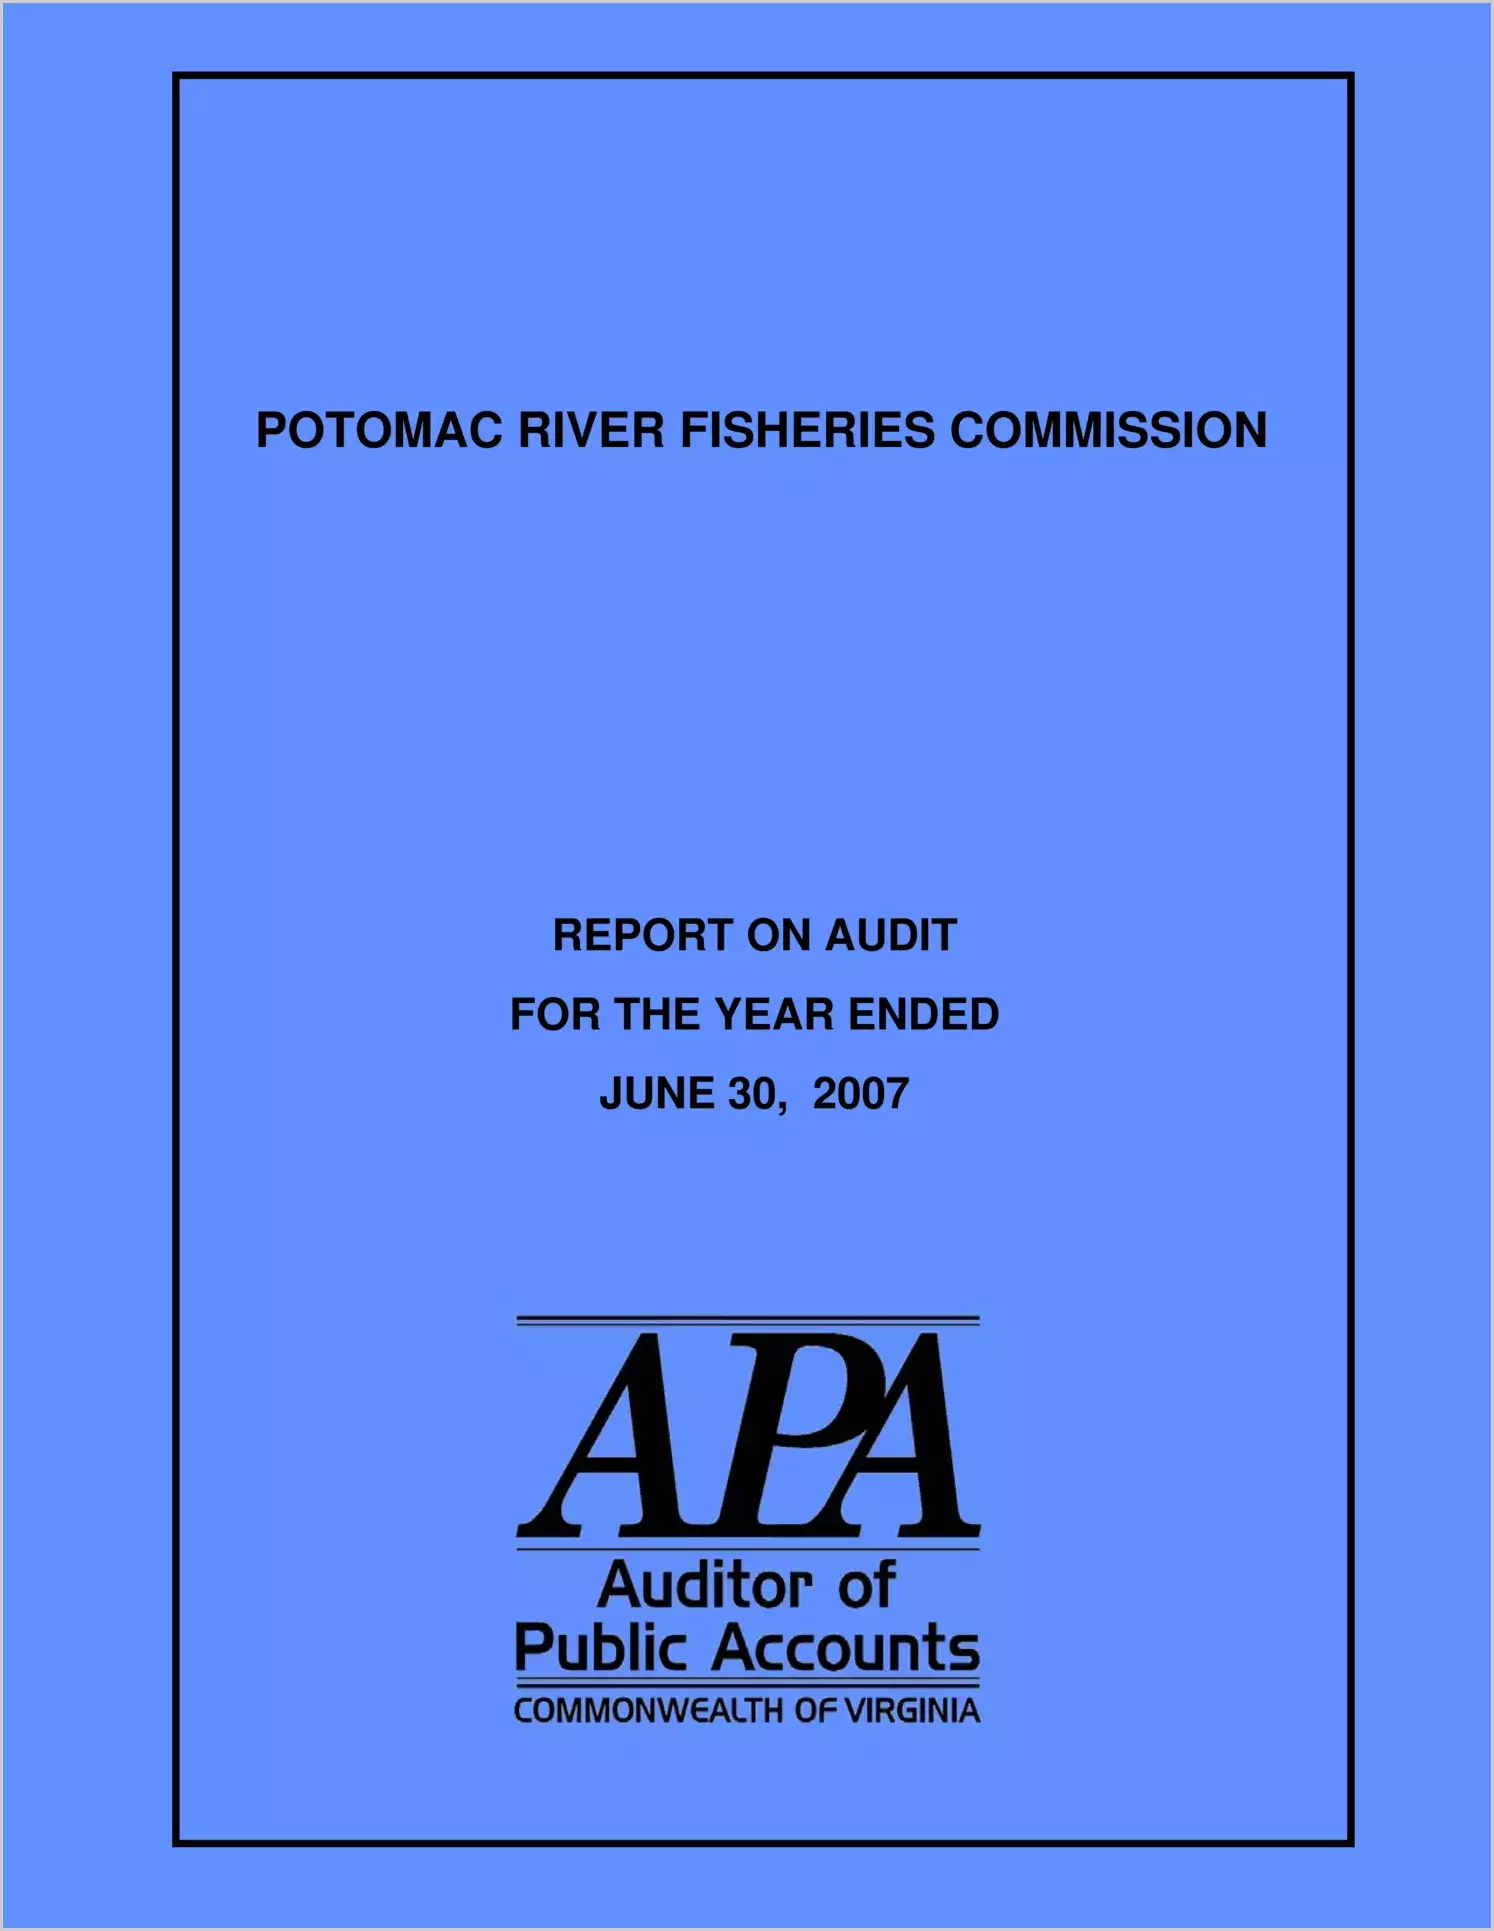 Potomac River Fisheries Commission report on audit for the year ended June 30, 2007